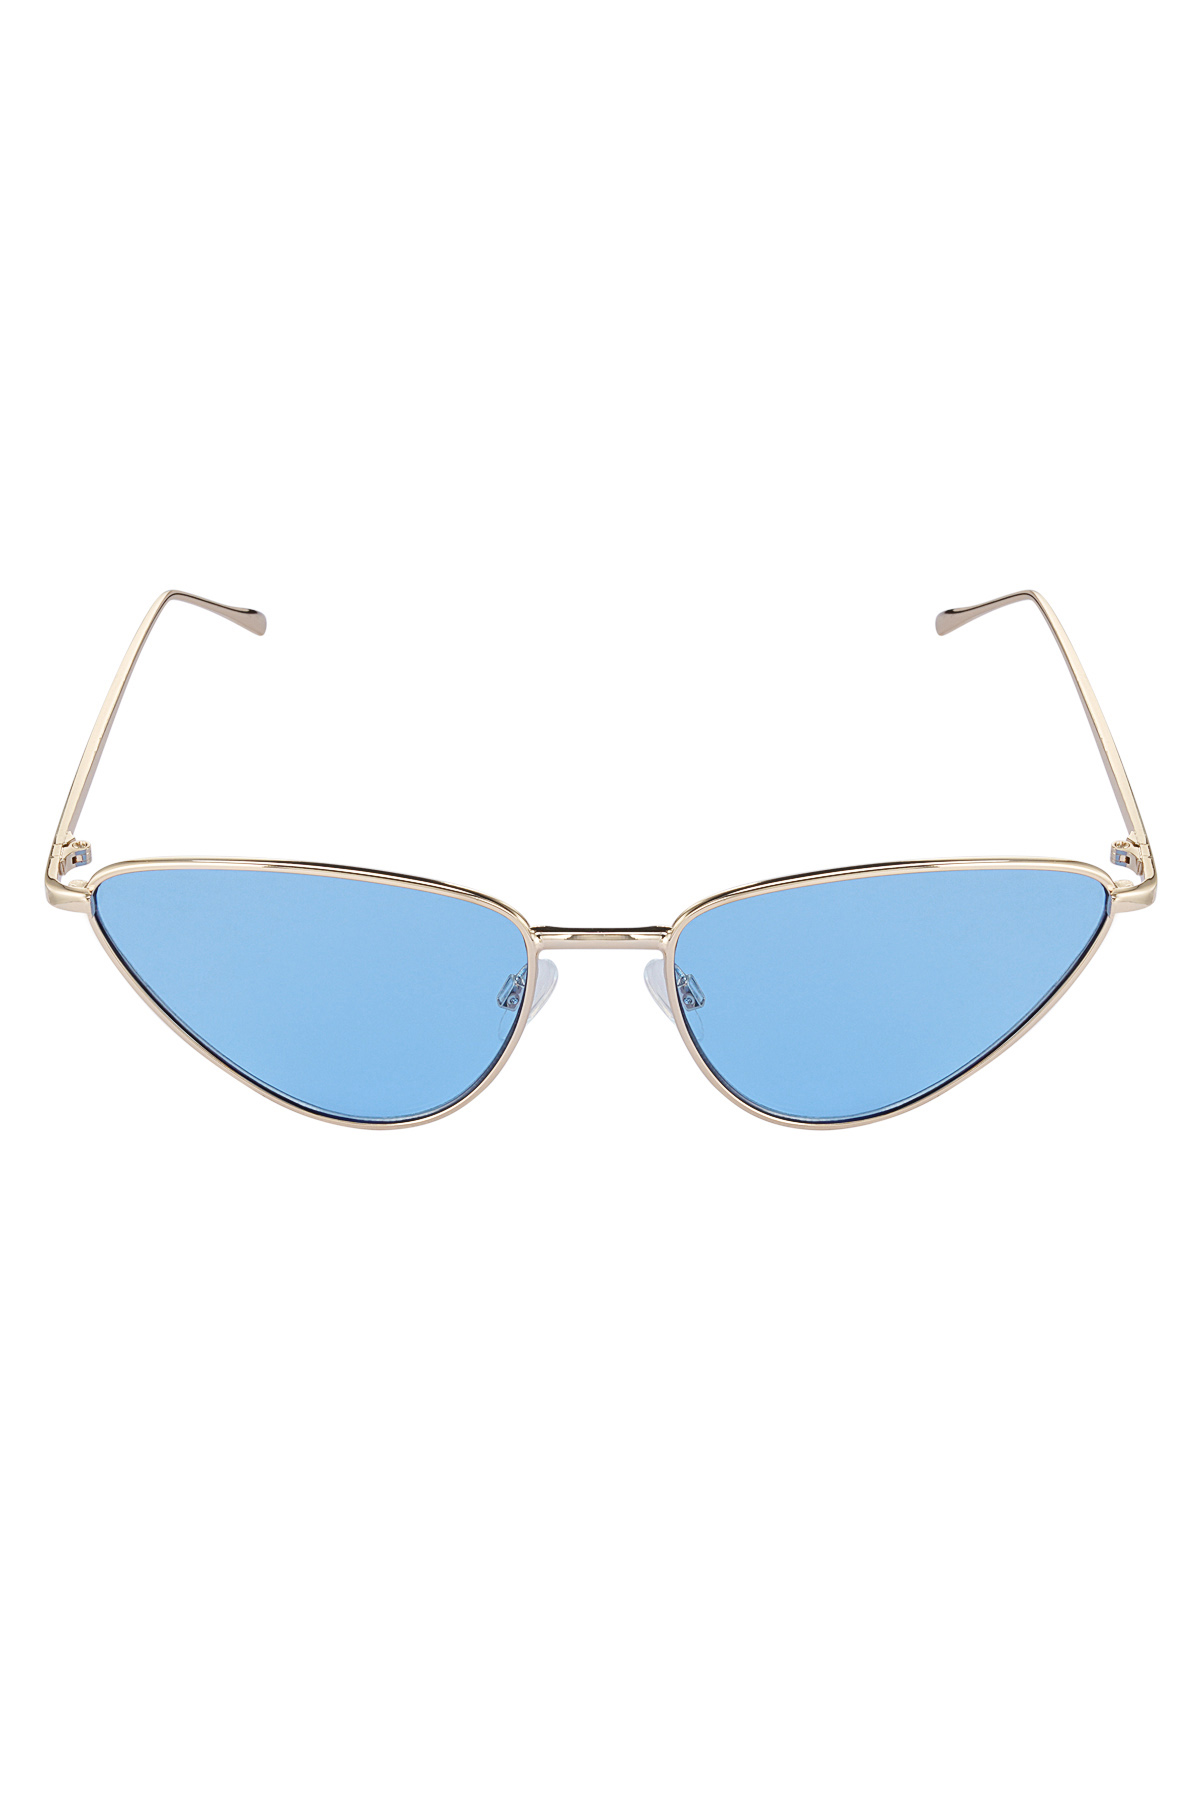 Sunglasses ready to shine - blue gold h5 Picture4